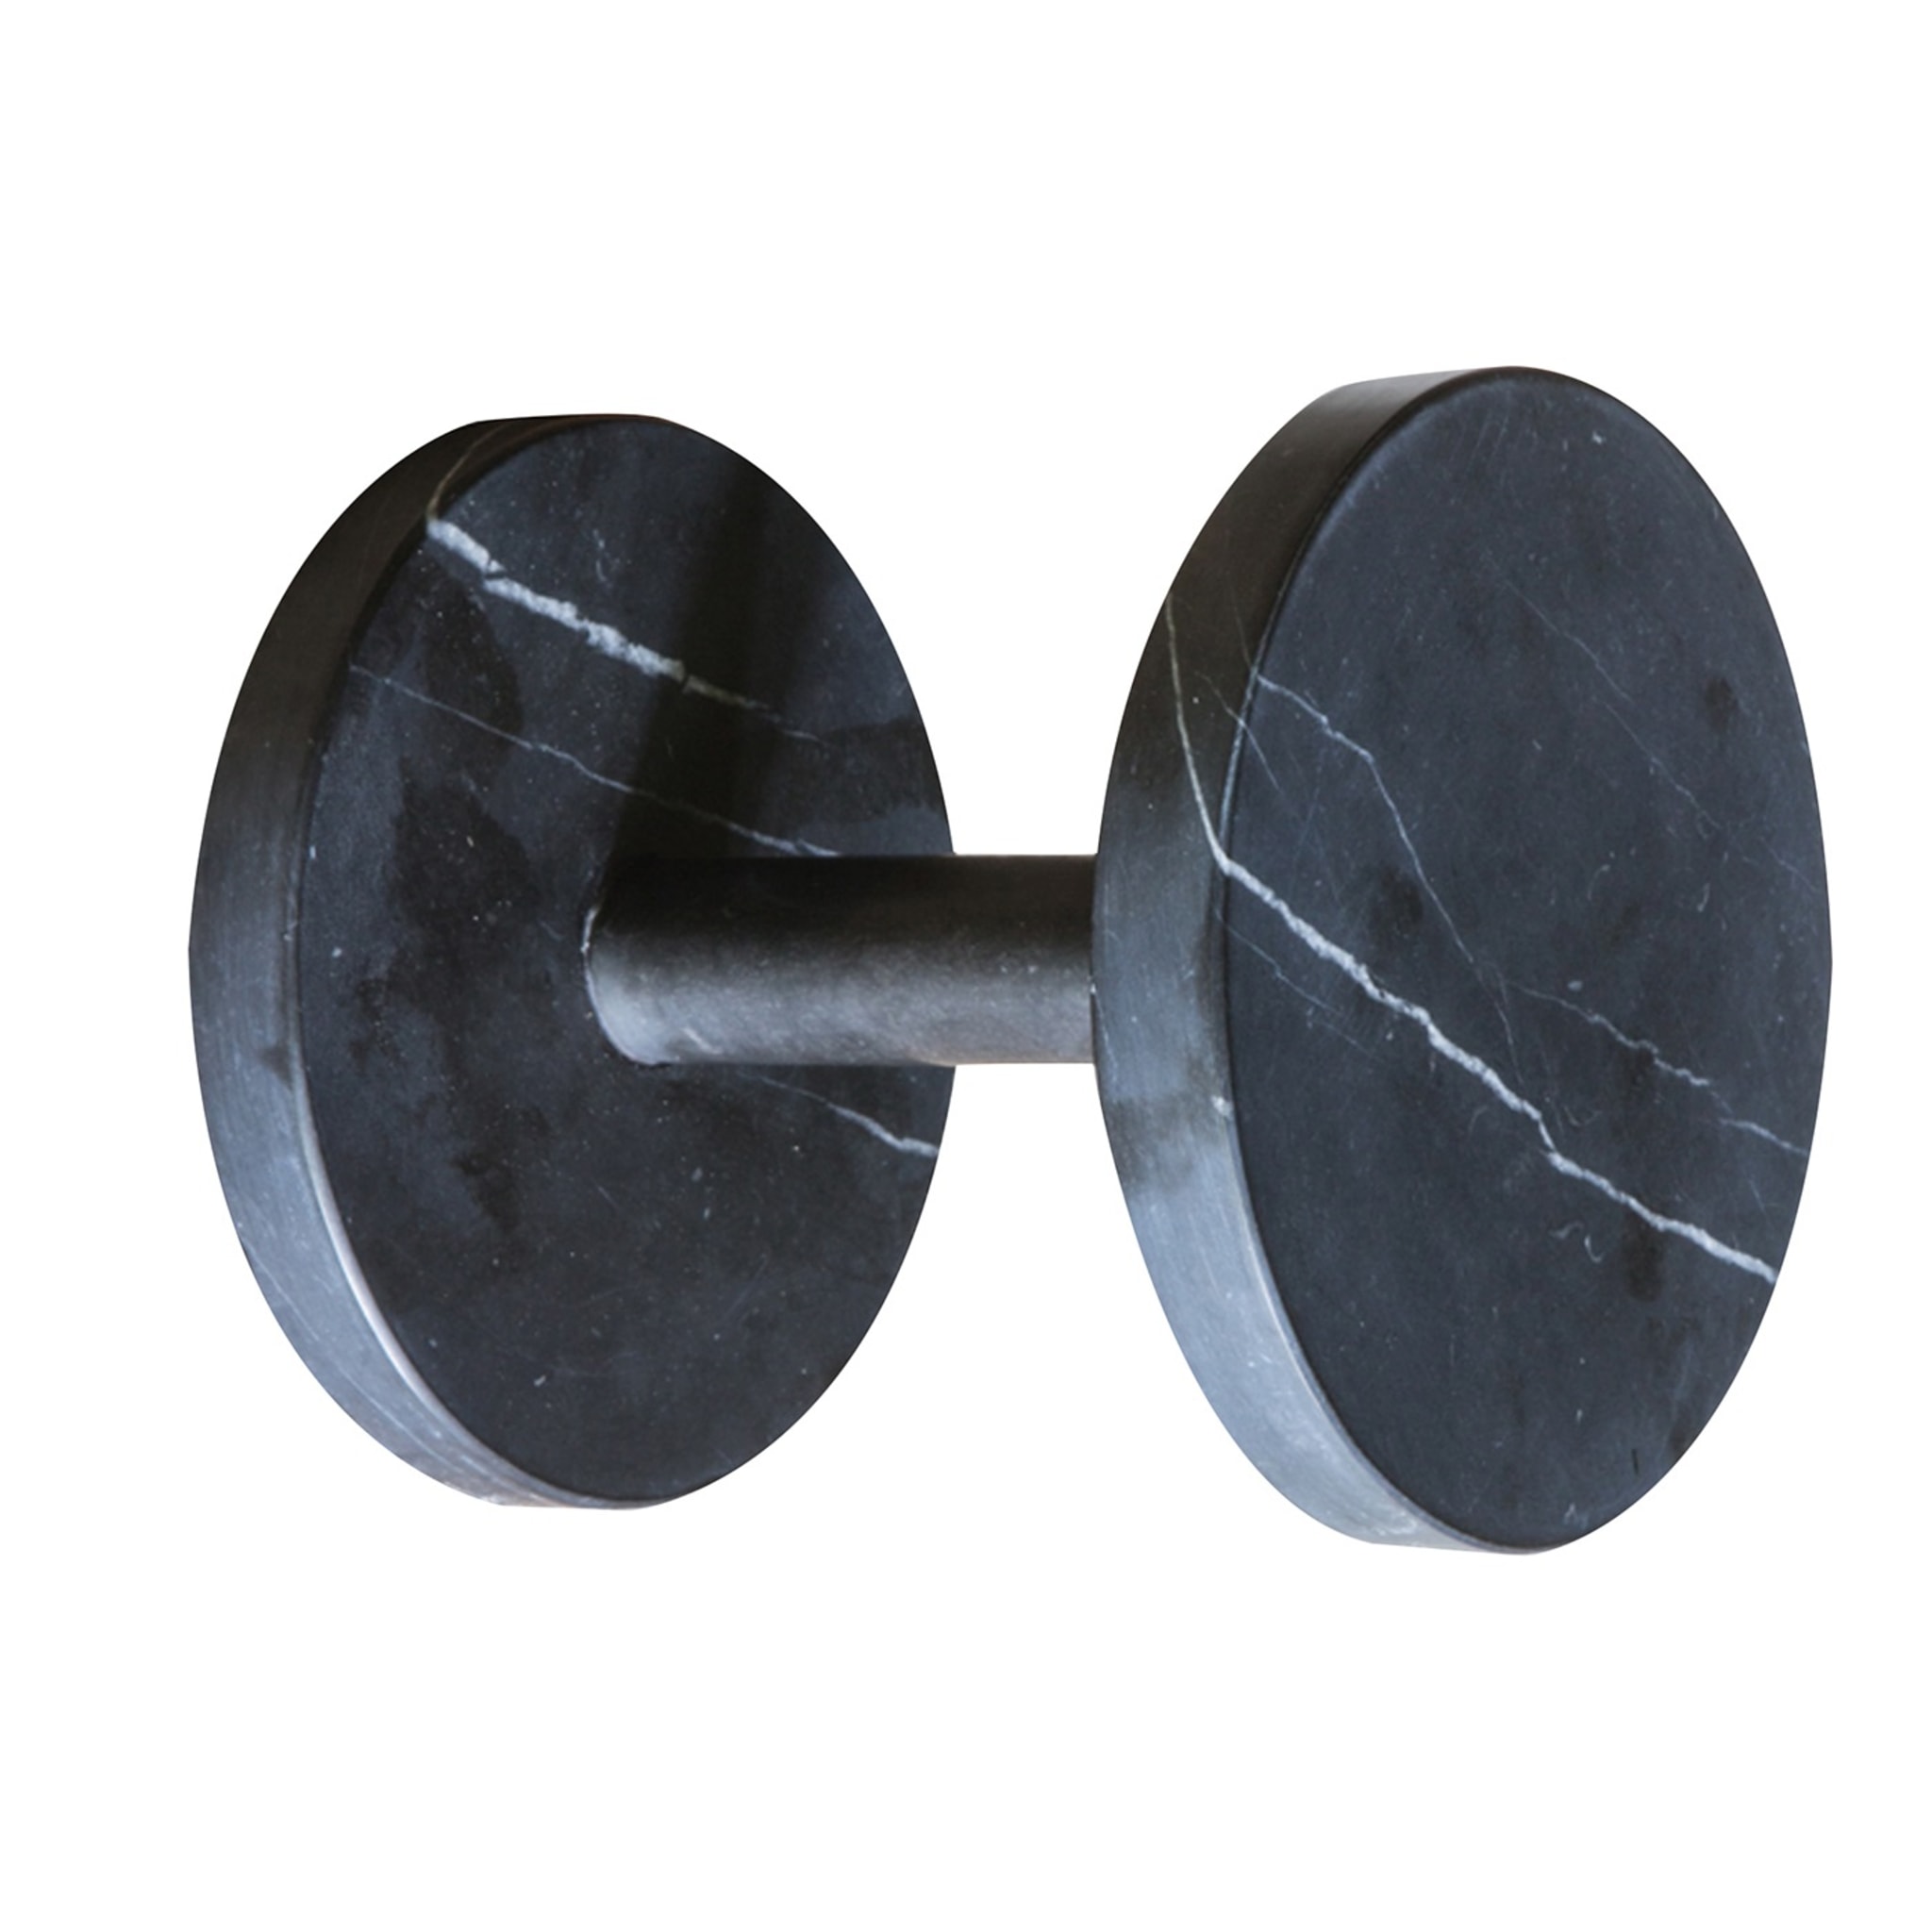 Ora Collection Set of 2 Black Marquina Peso Specifico Weights - Main view